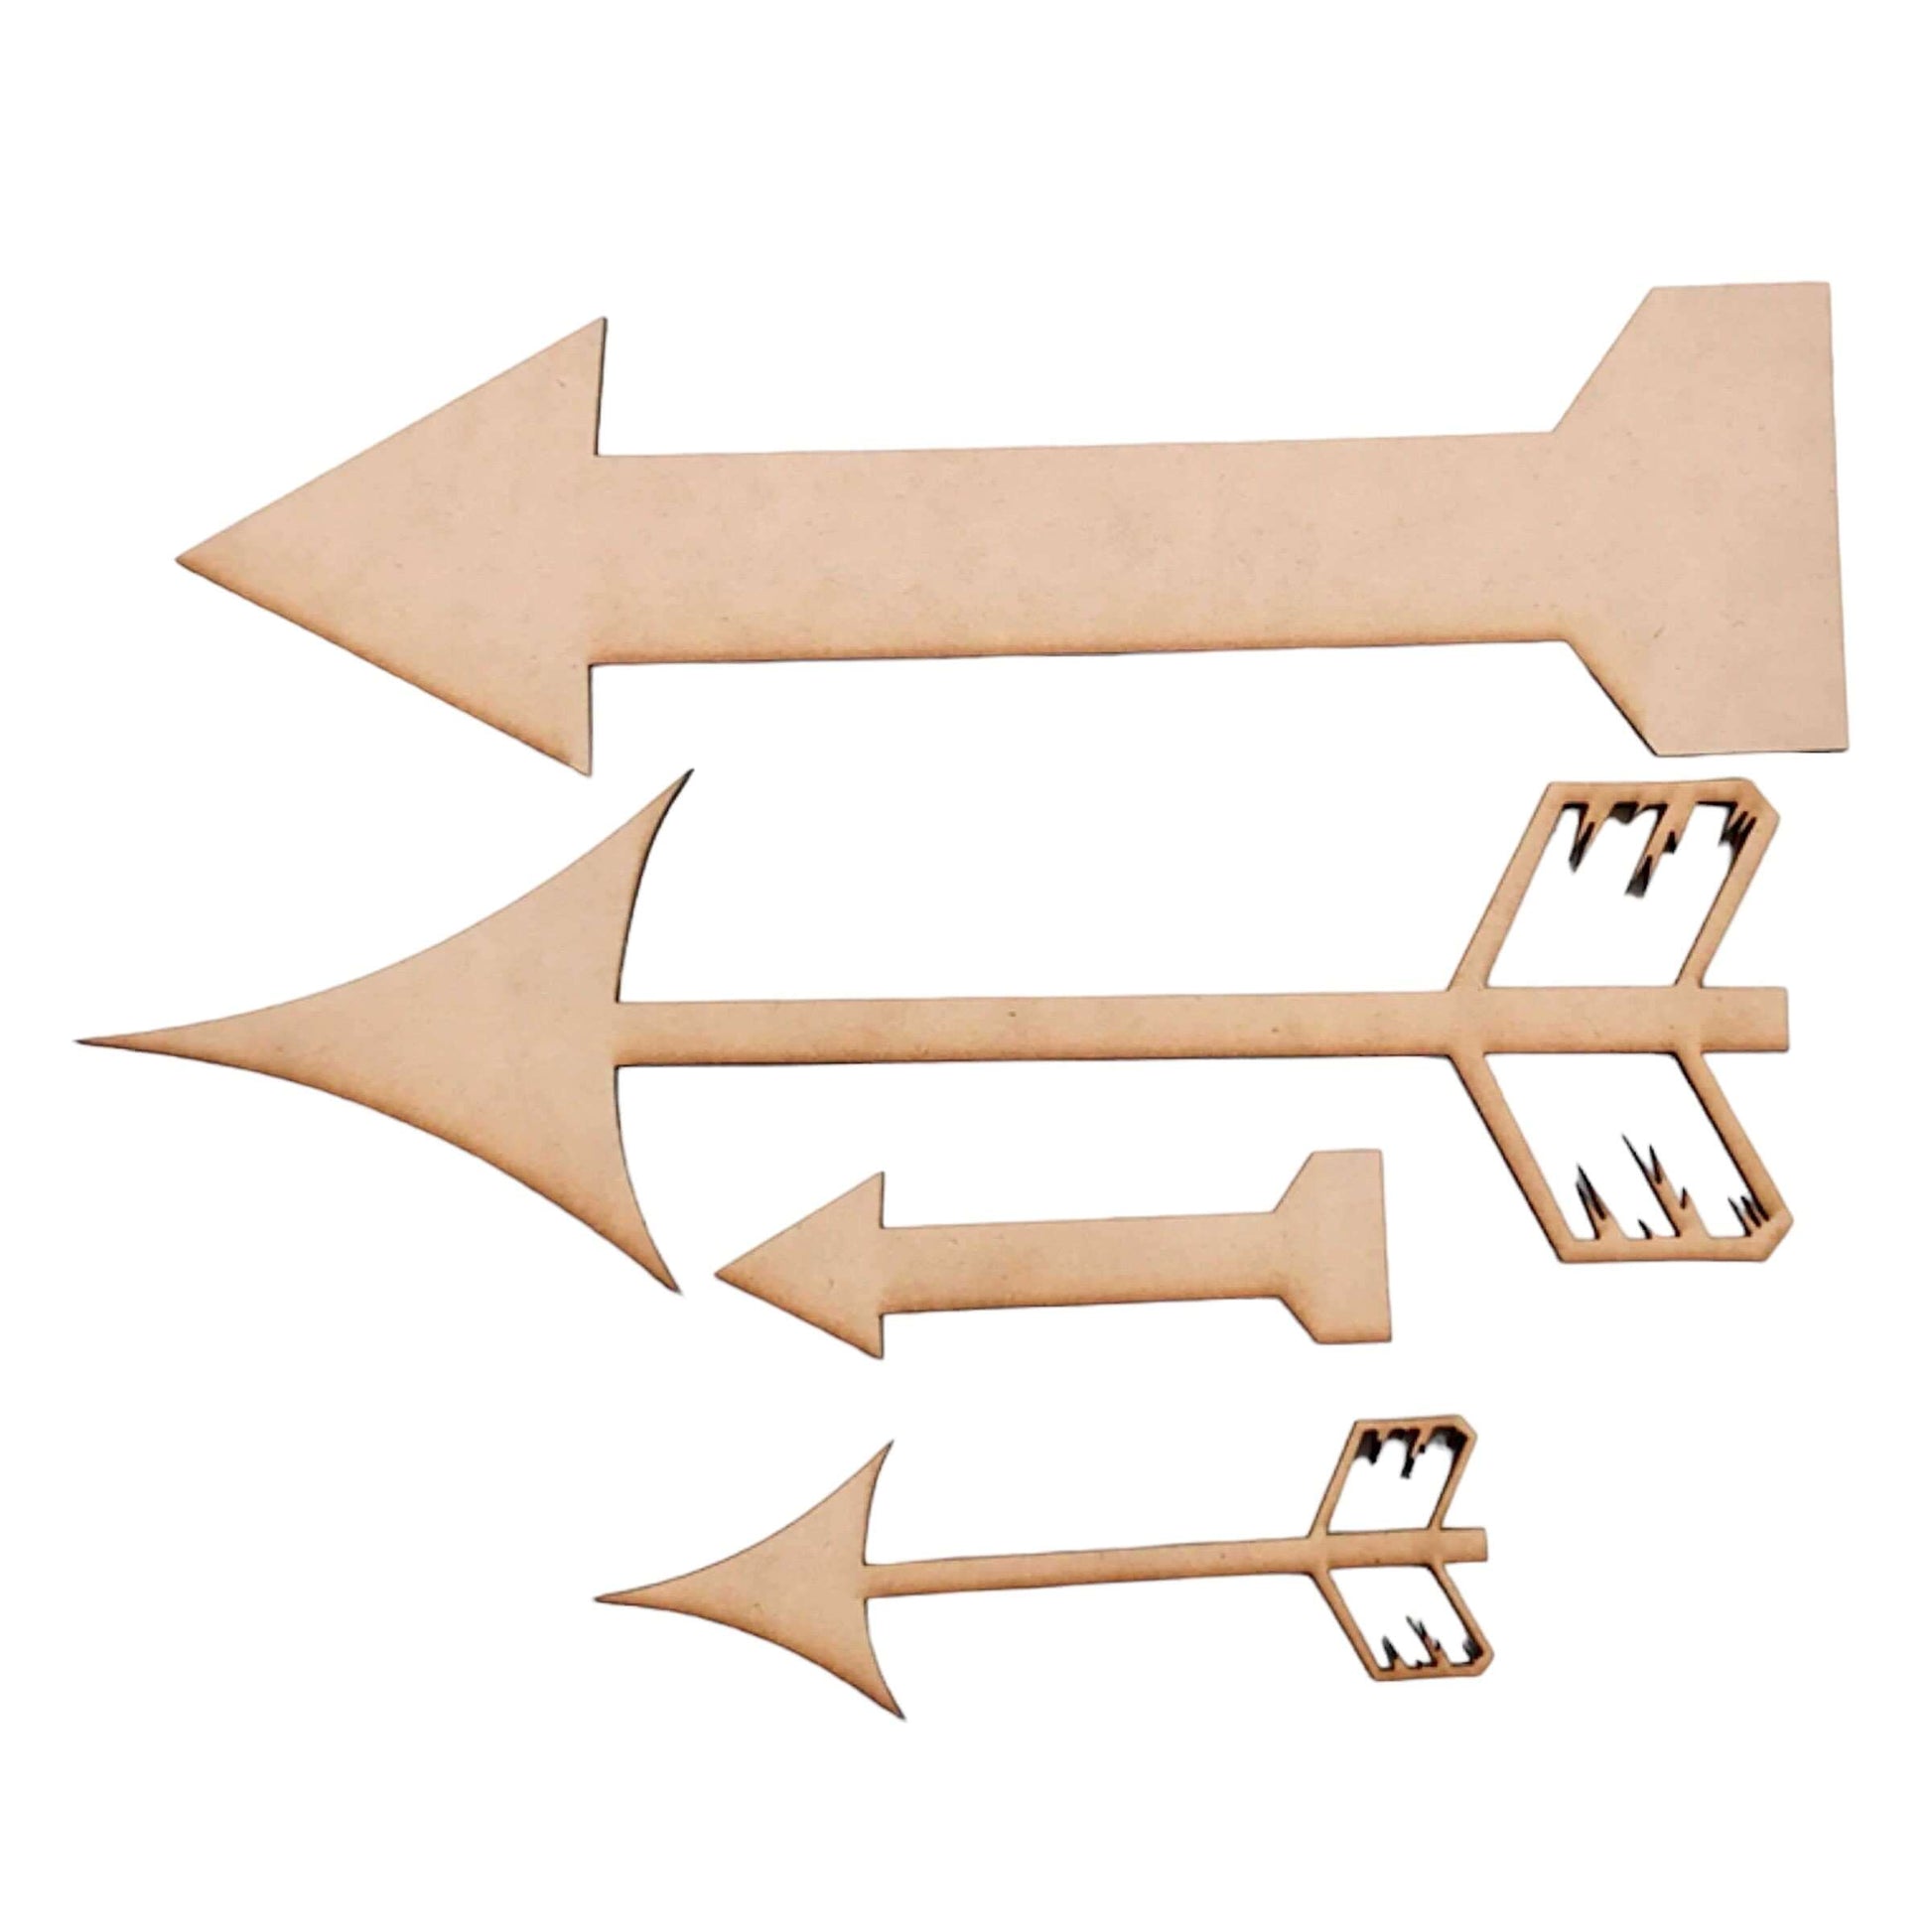 Arrow Set of 4 MDF DIY Raw Cut Out Art Craft Decor - The Renmy Store Homewares & Gifts 